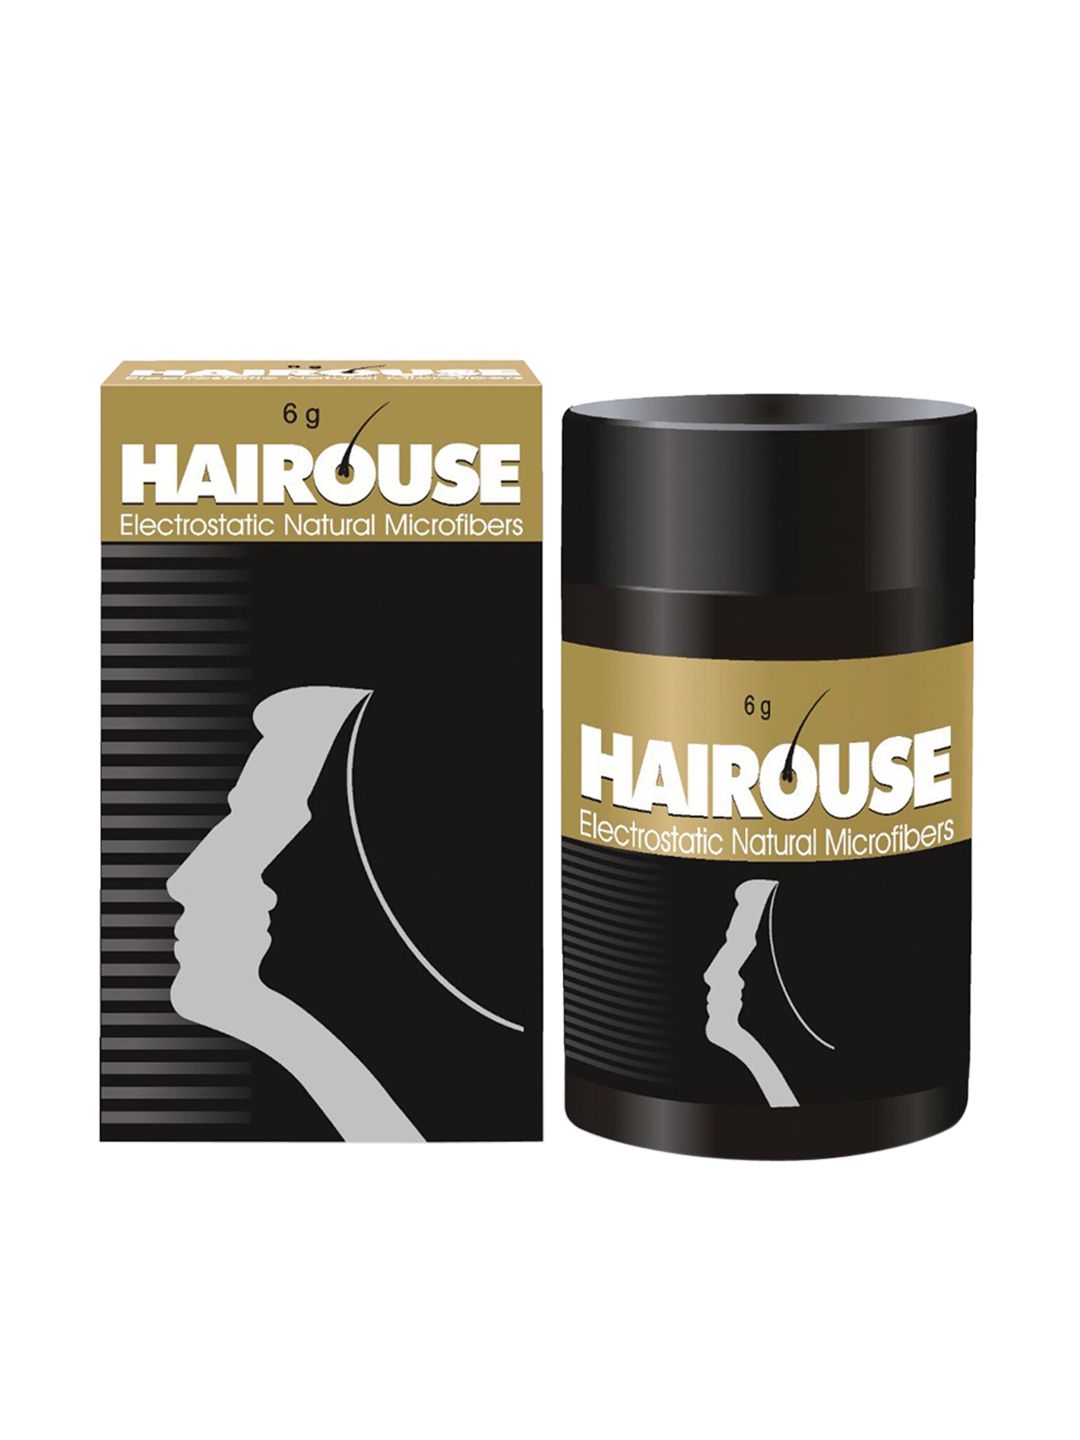 HAIROUSE Unisex Jet Black Natural Hair Building Microfibers 6 g Price in India